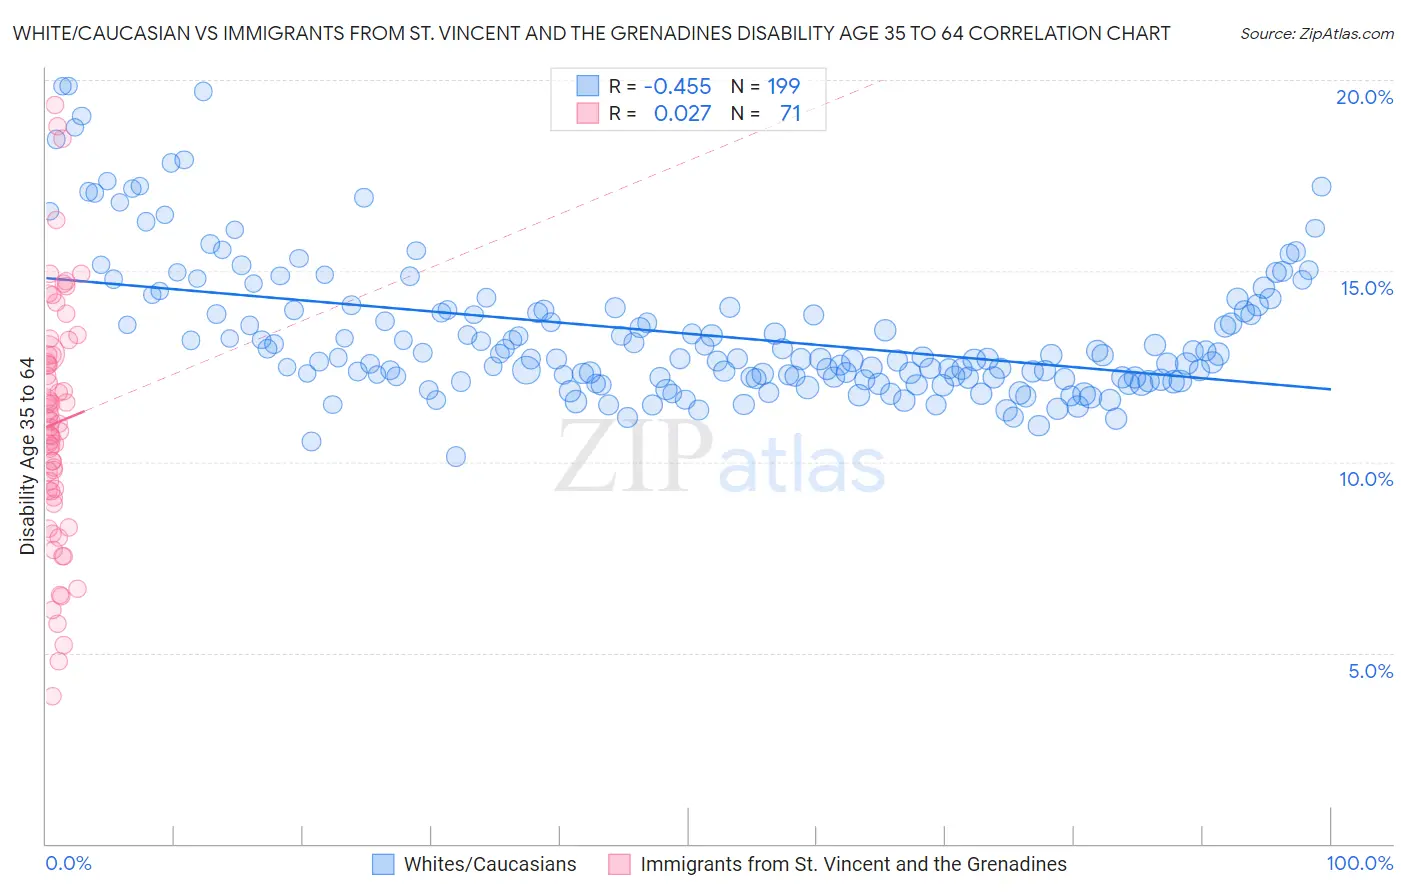 White/Caucasian vs Immigrants from St. Vincent and the Grenadines Disability Age 35 to 64